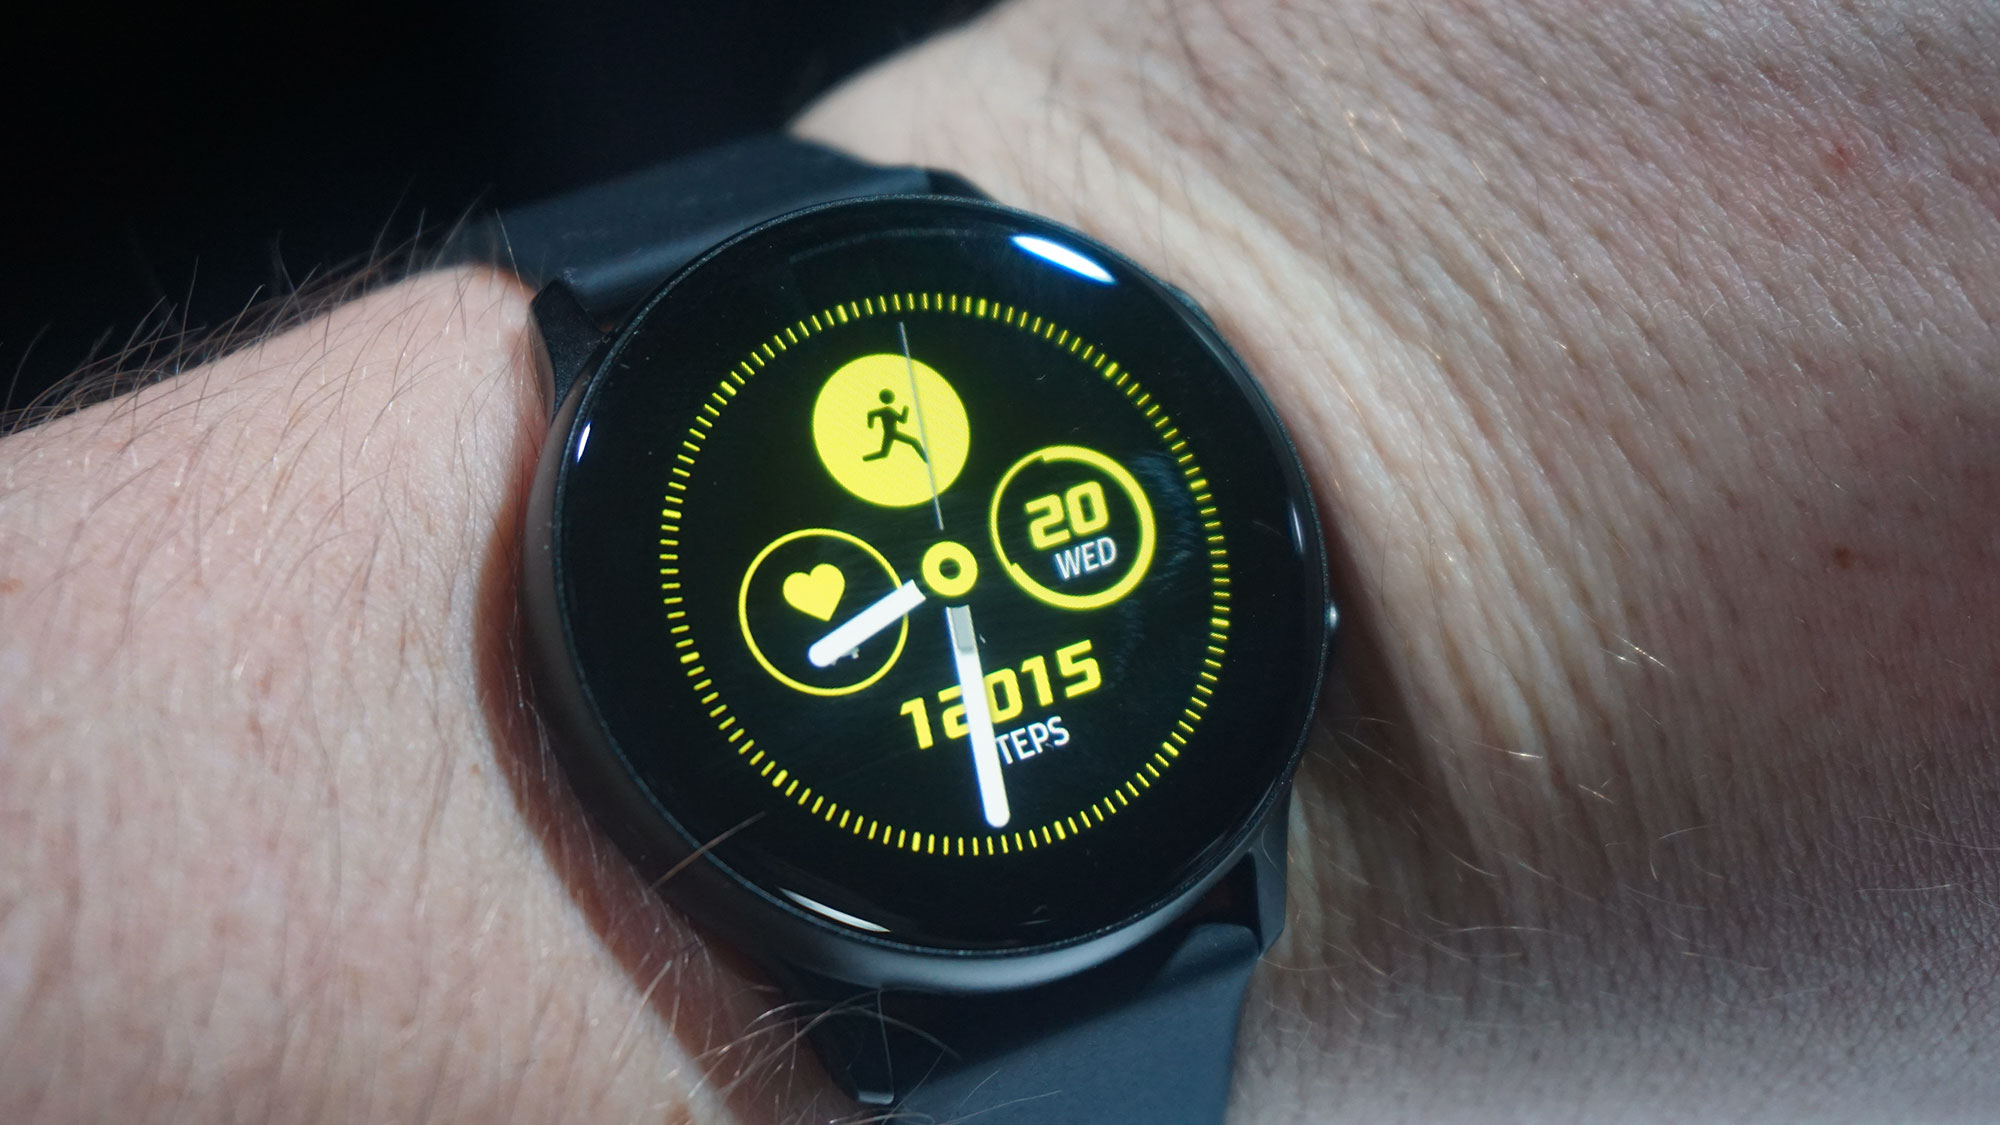 samsung galaxy watch active model number